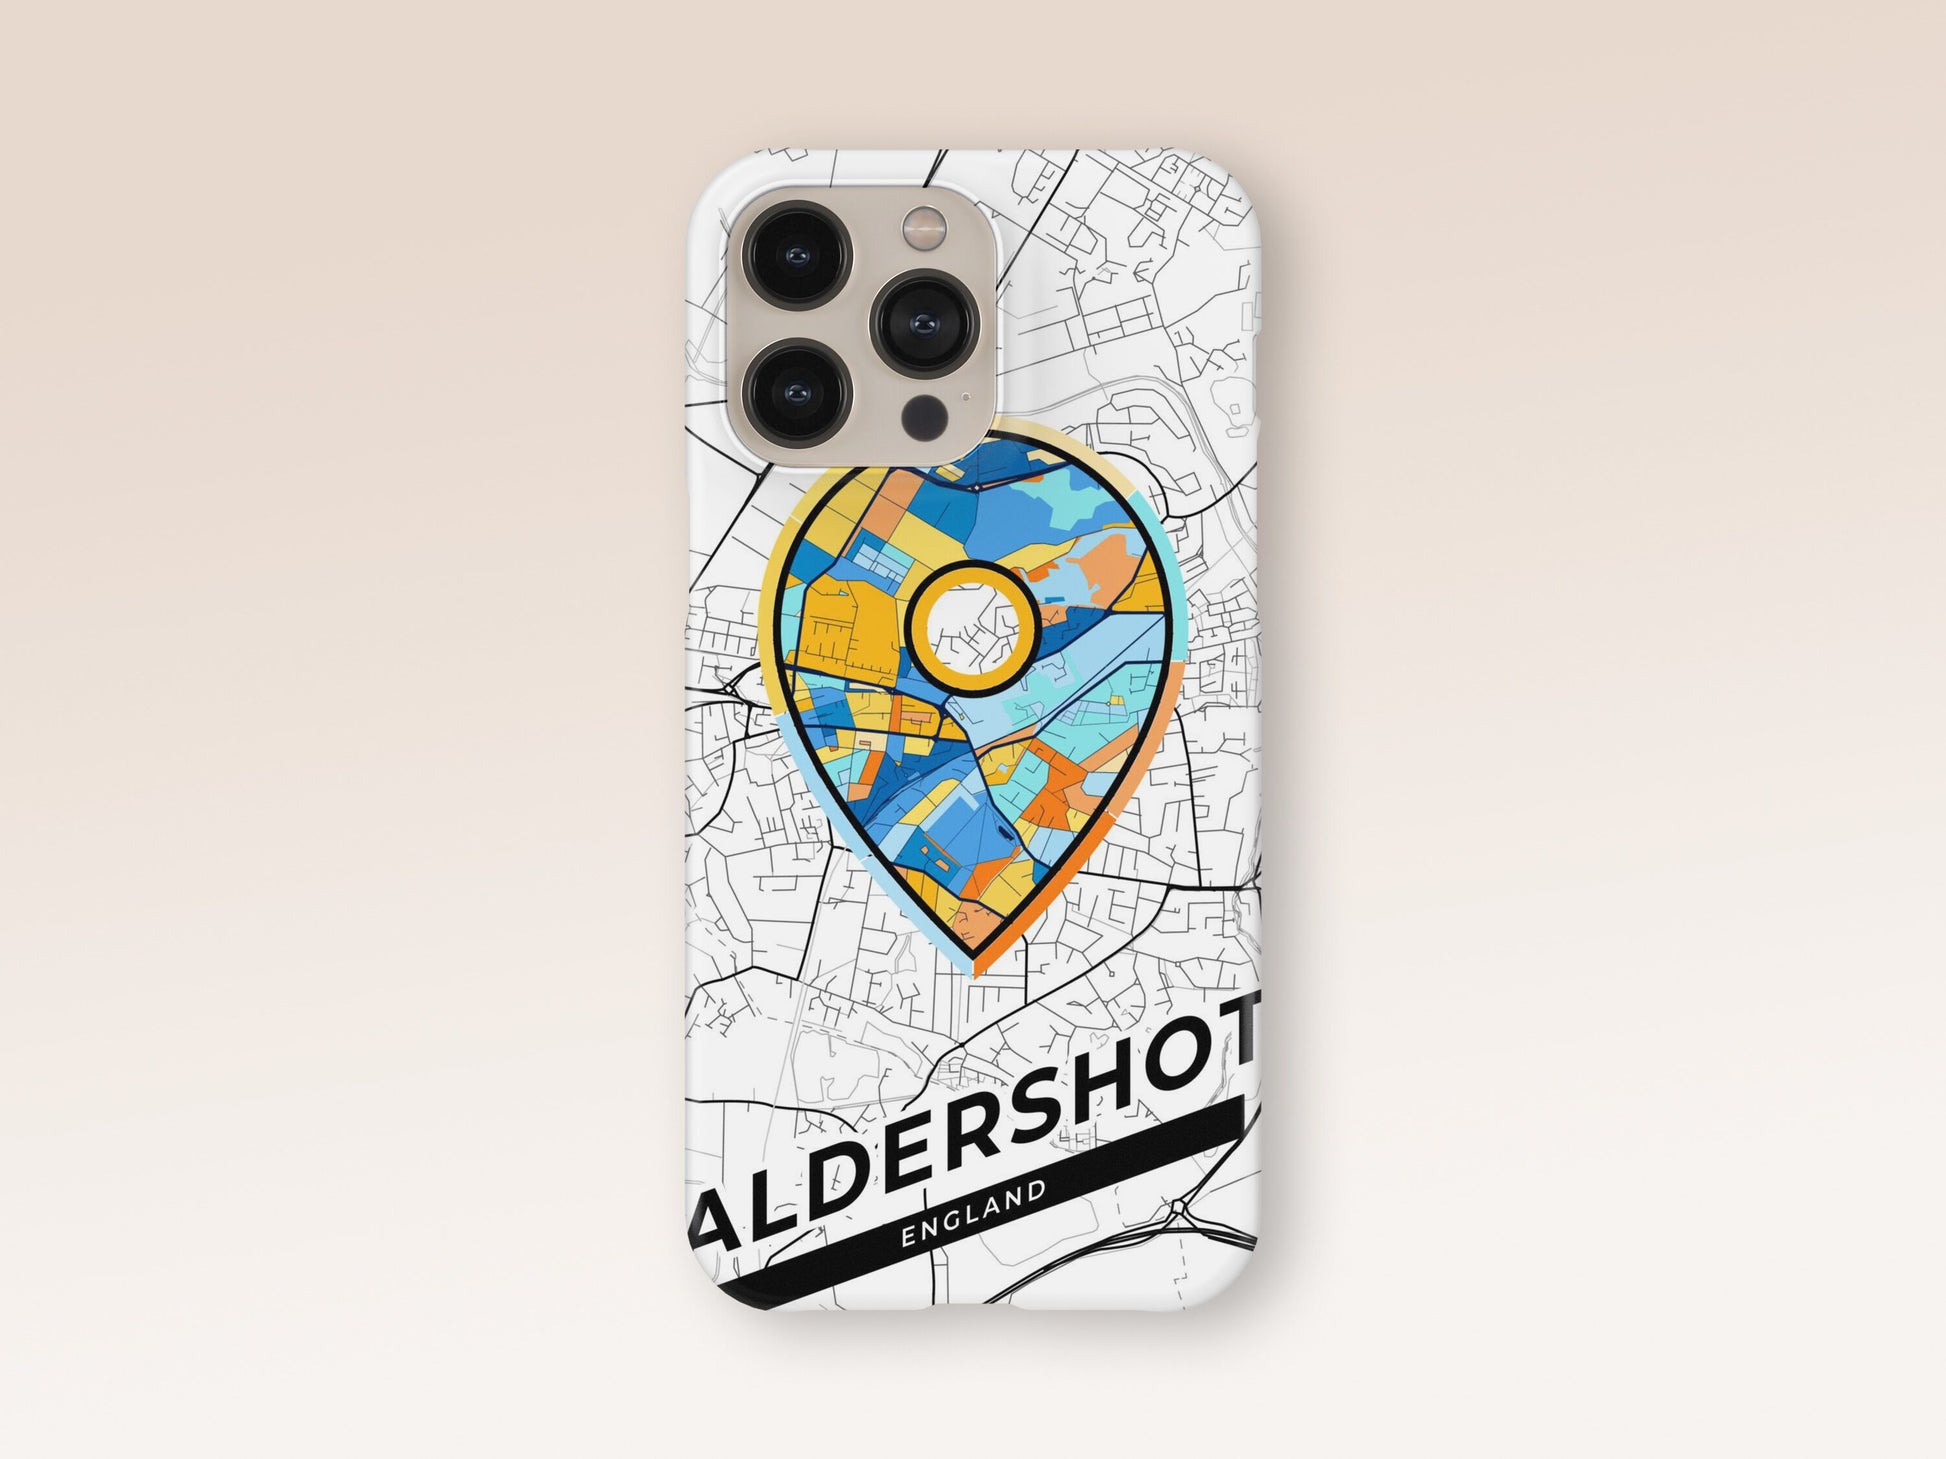 Aldershot England slim phone case with colorful icon. Birthday, wedding or housewarming gift. Couple match cases. 1